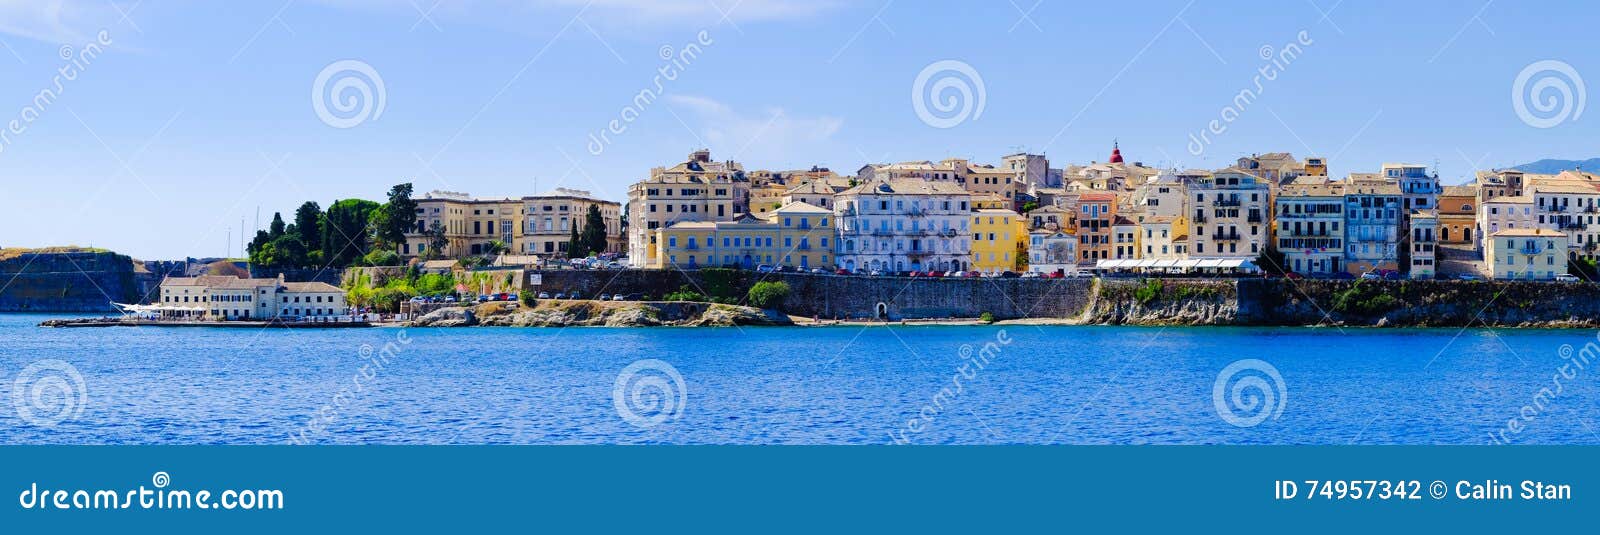 panorama of corfu town from the sea. old town buildings